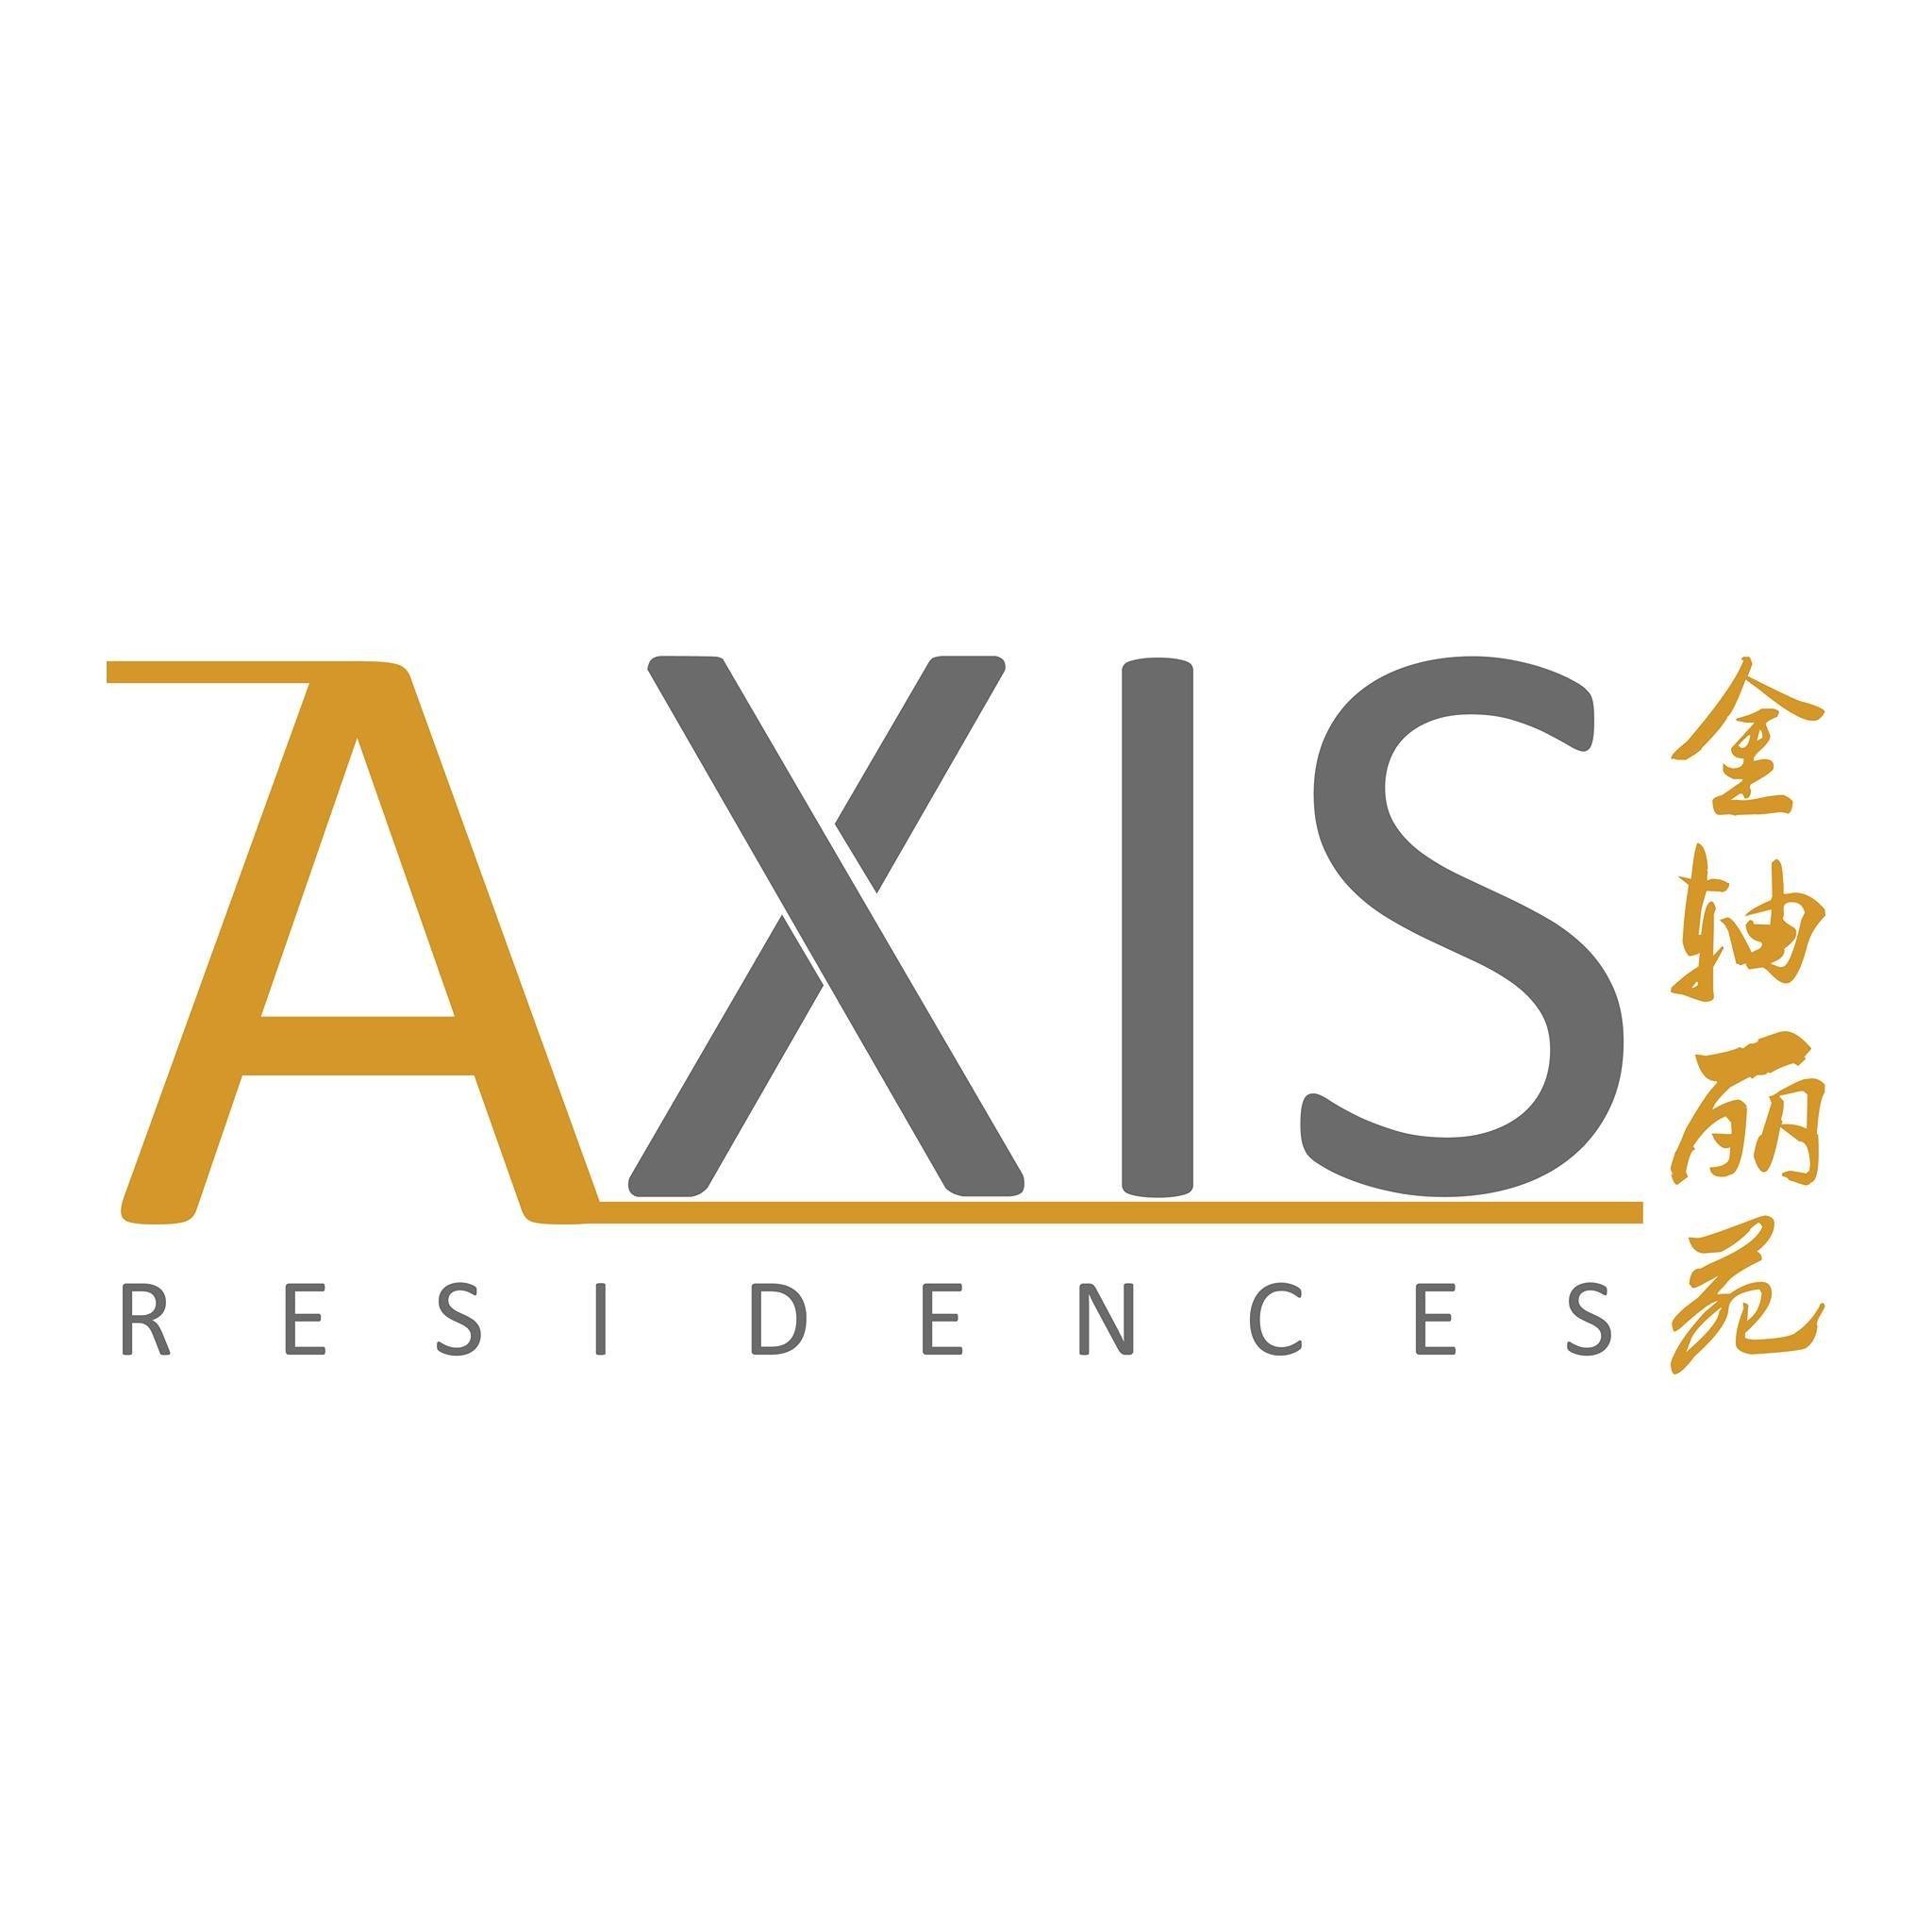 AXIS RESIDENCES